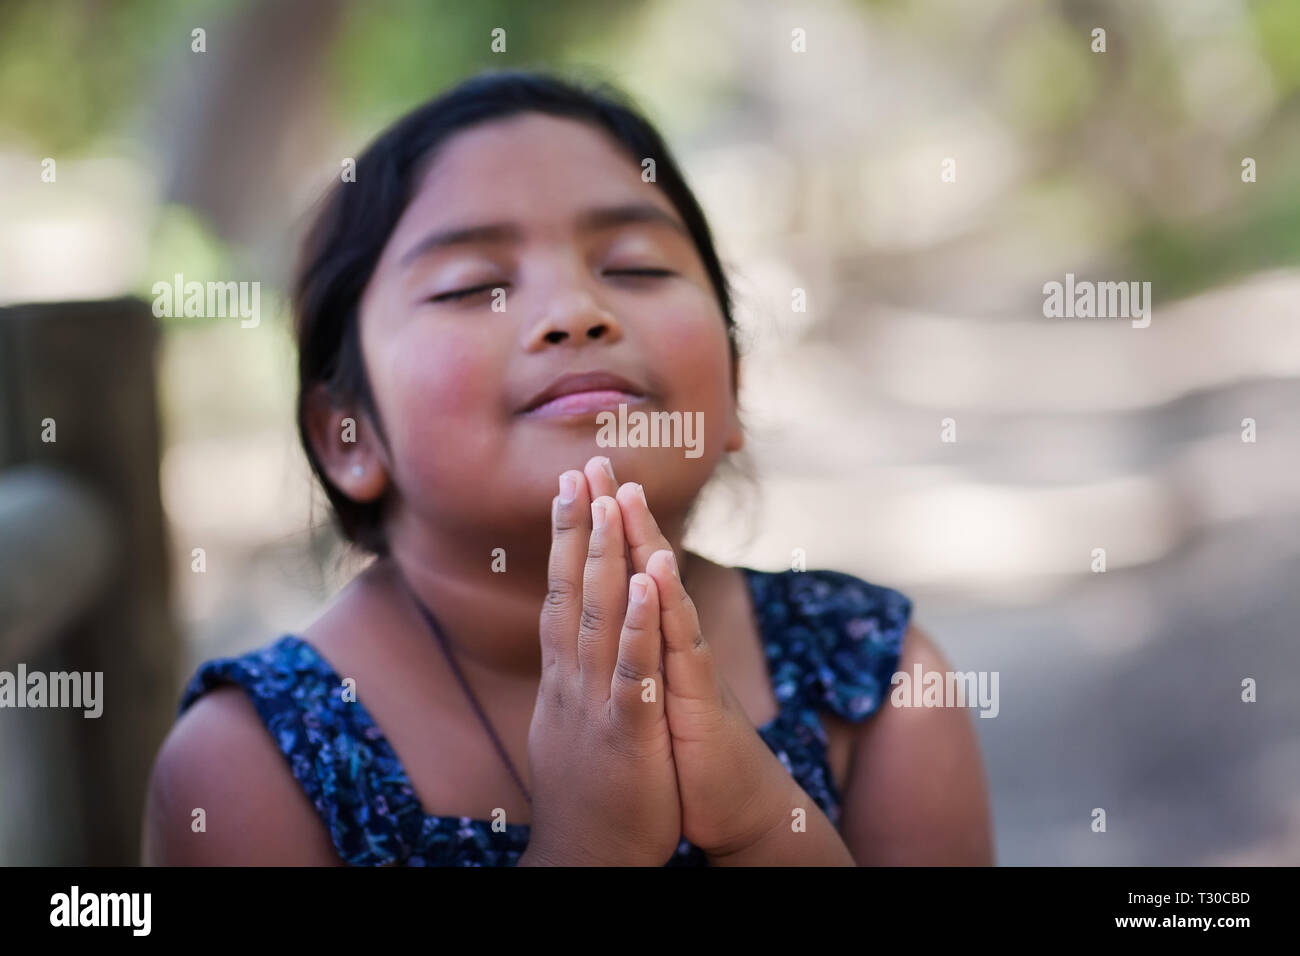 A native young girl with hands together in prayer, in an outdoor setting praying to God with a subtle smile. Stock Photo